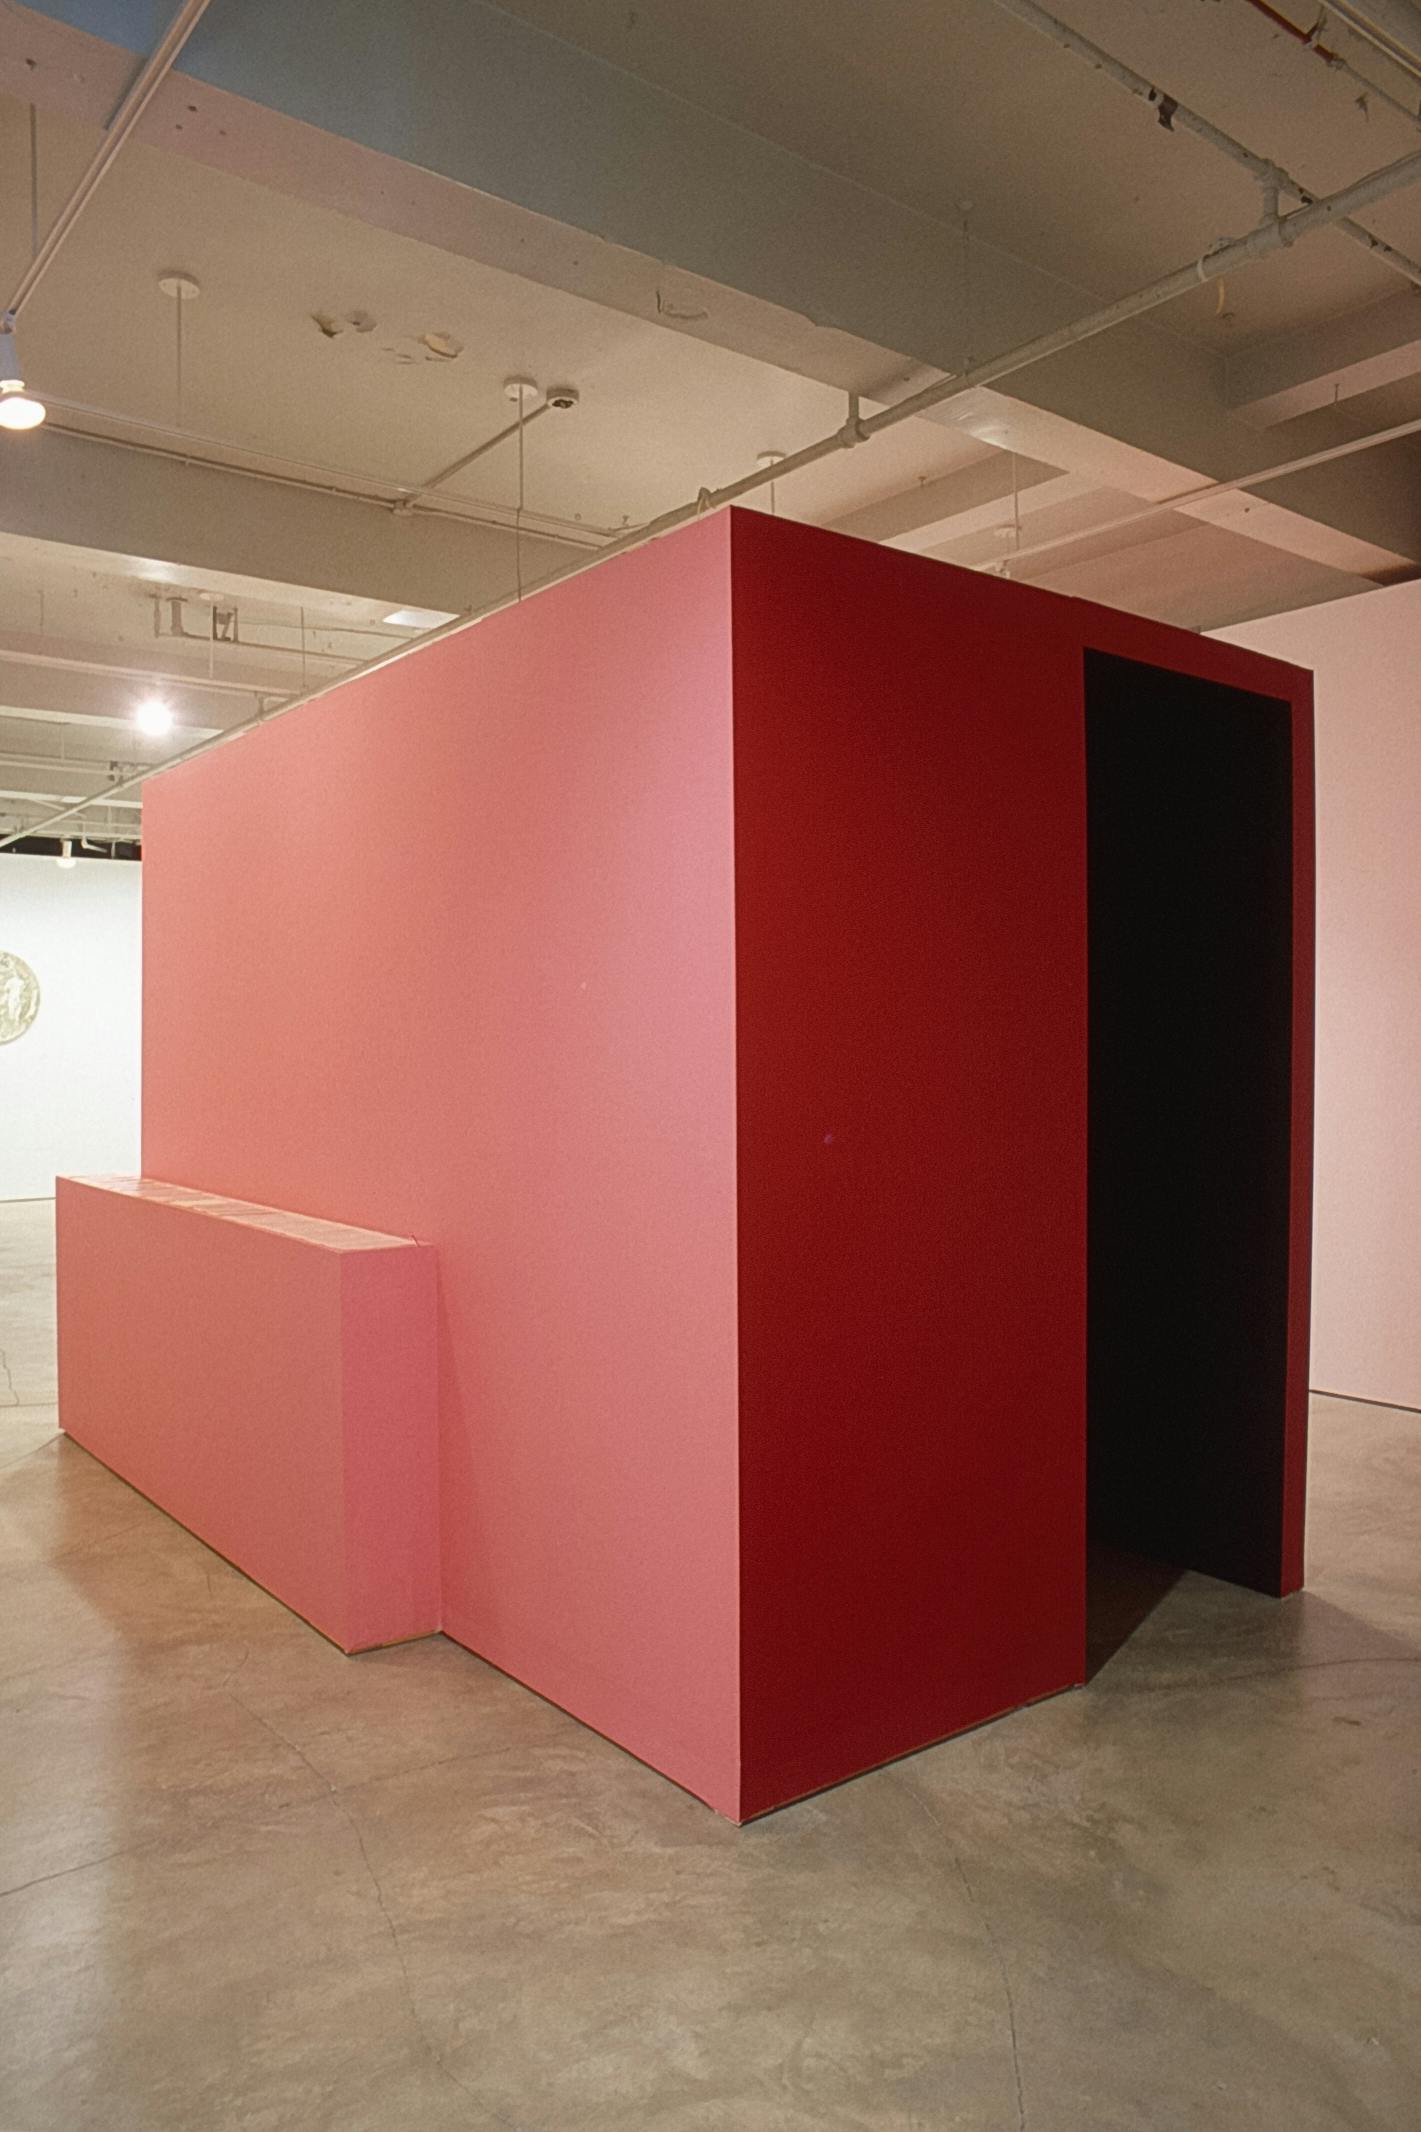 A large-sized red cube is built in a gallery space. A black rectangular on the right end of the cube looks like a door through which the visitors may walk inside the cube.